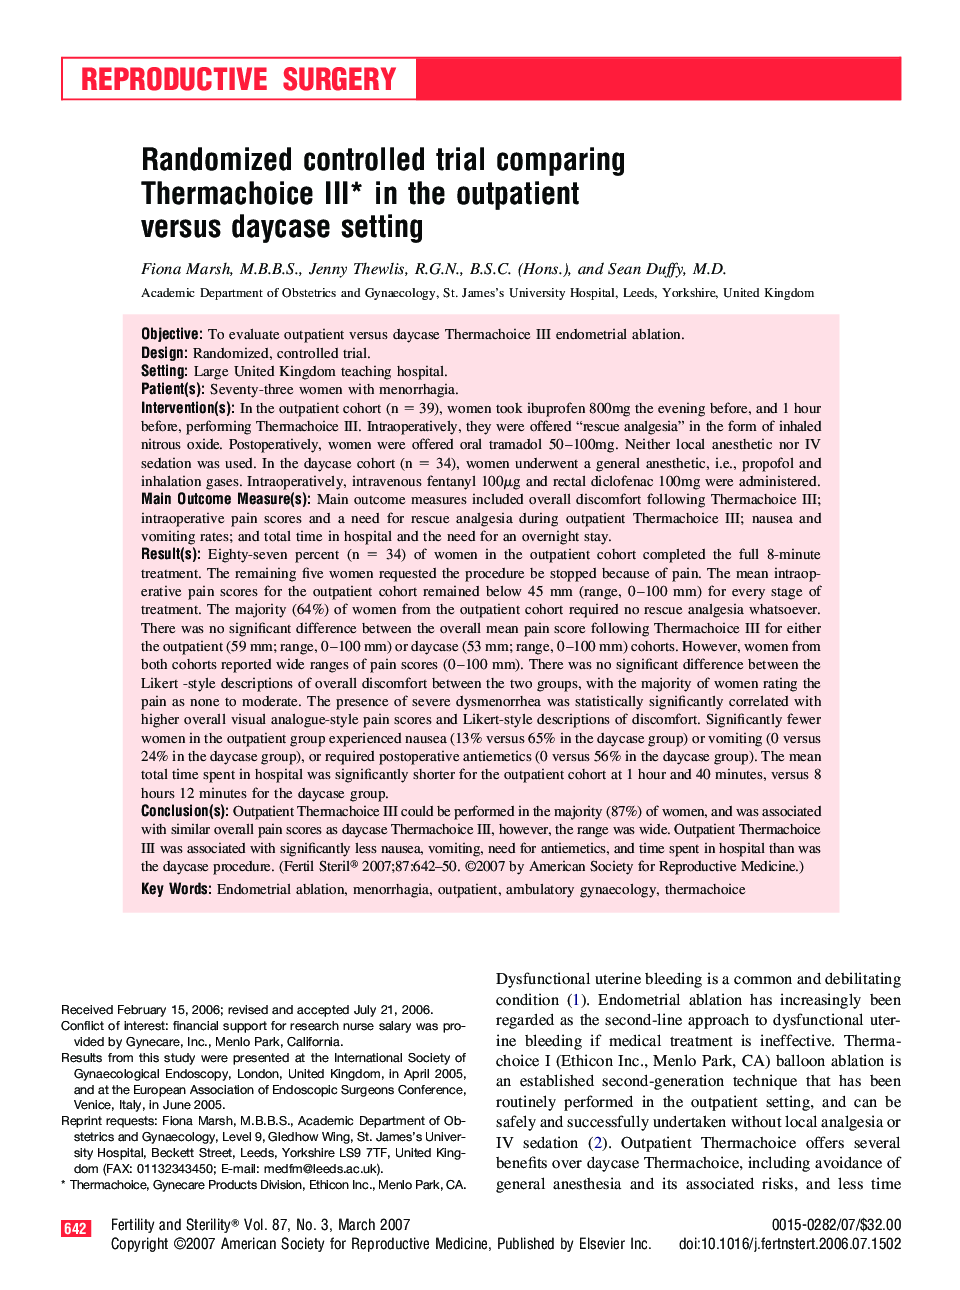 Randomized controlled trial comparing Thermachoice III* in the outpatient versus daycase setting ⁎